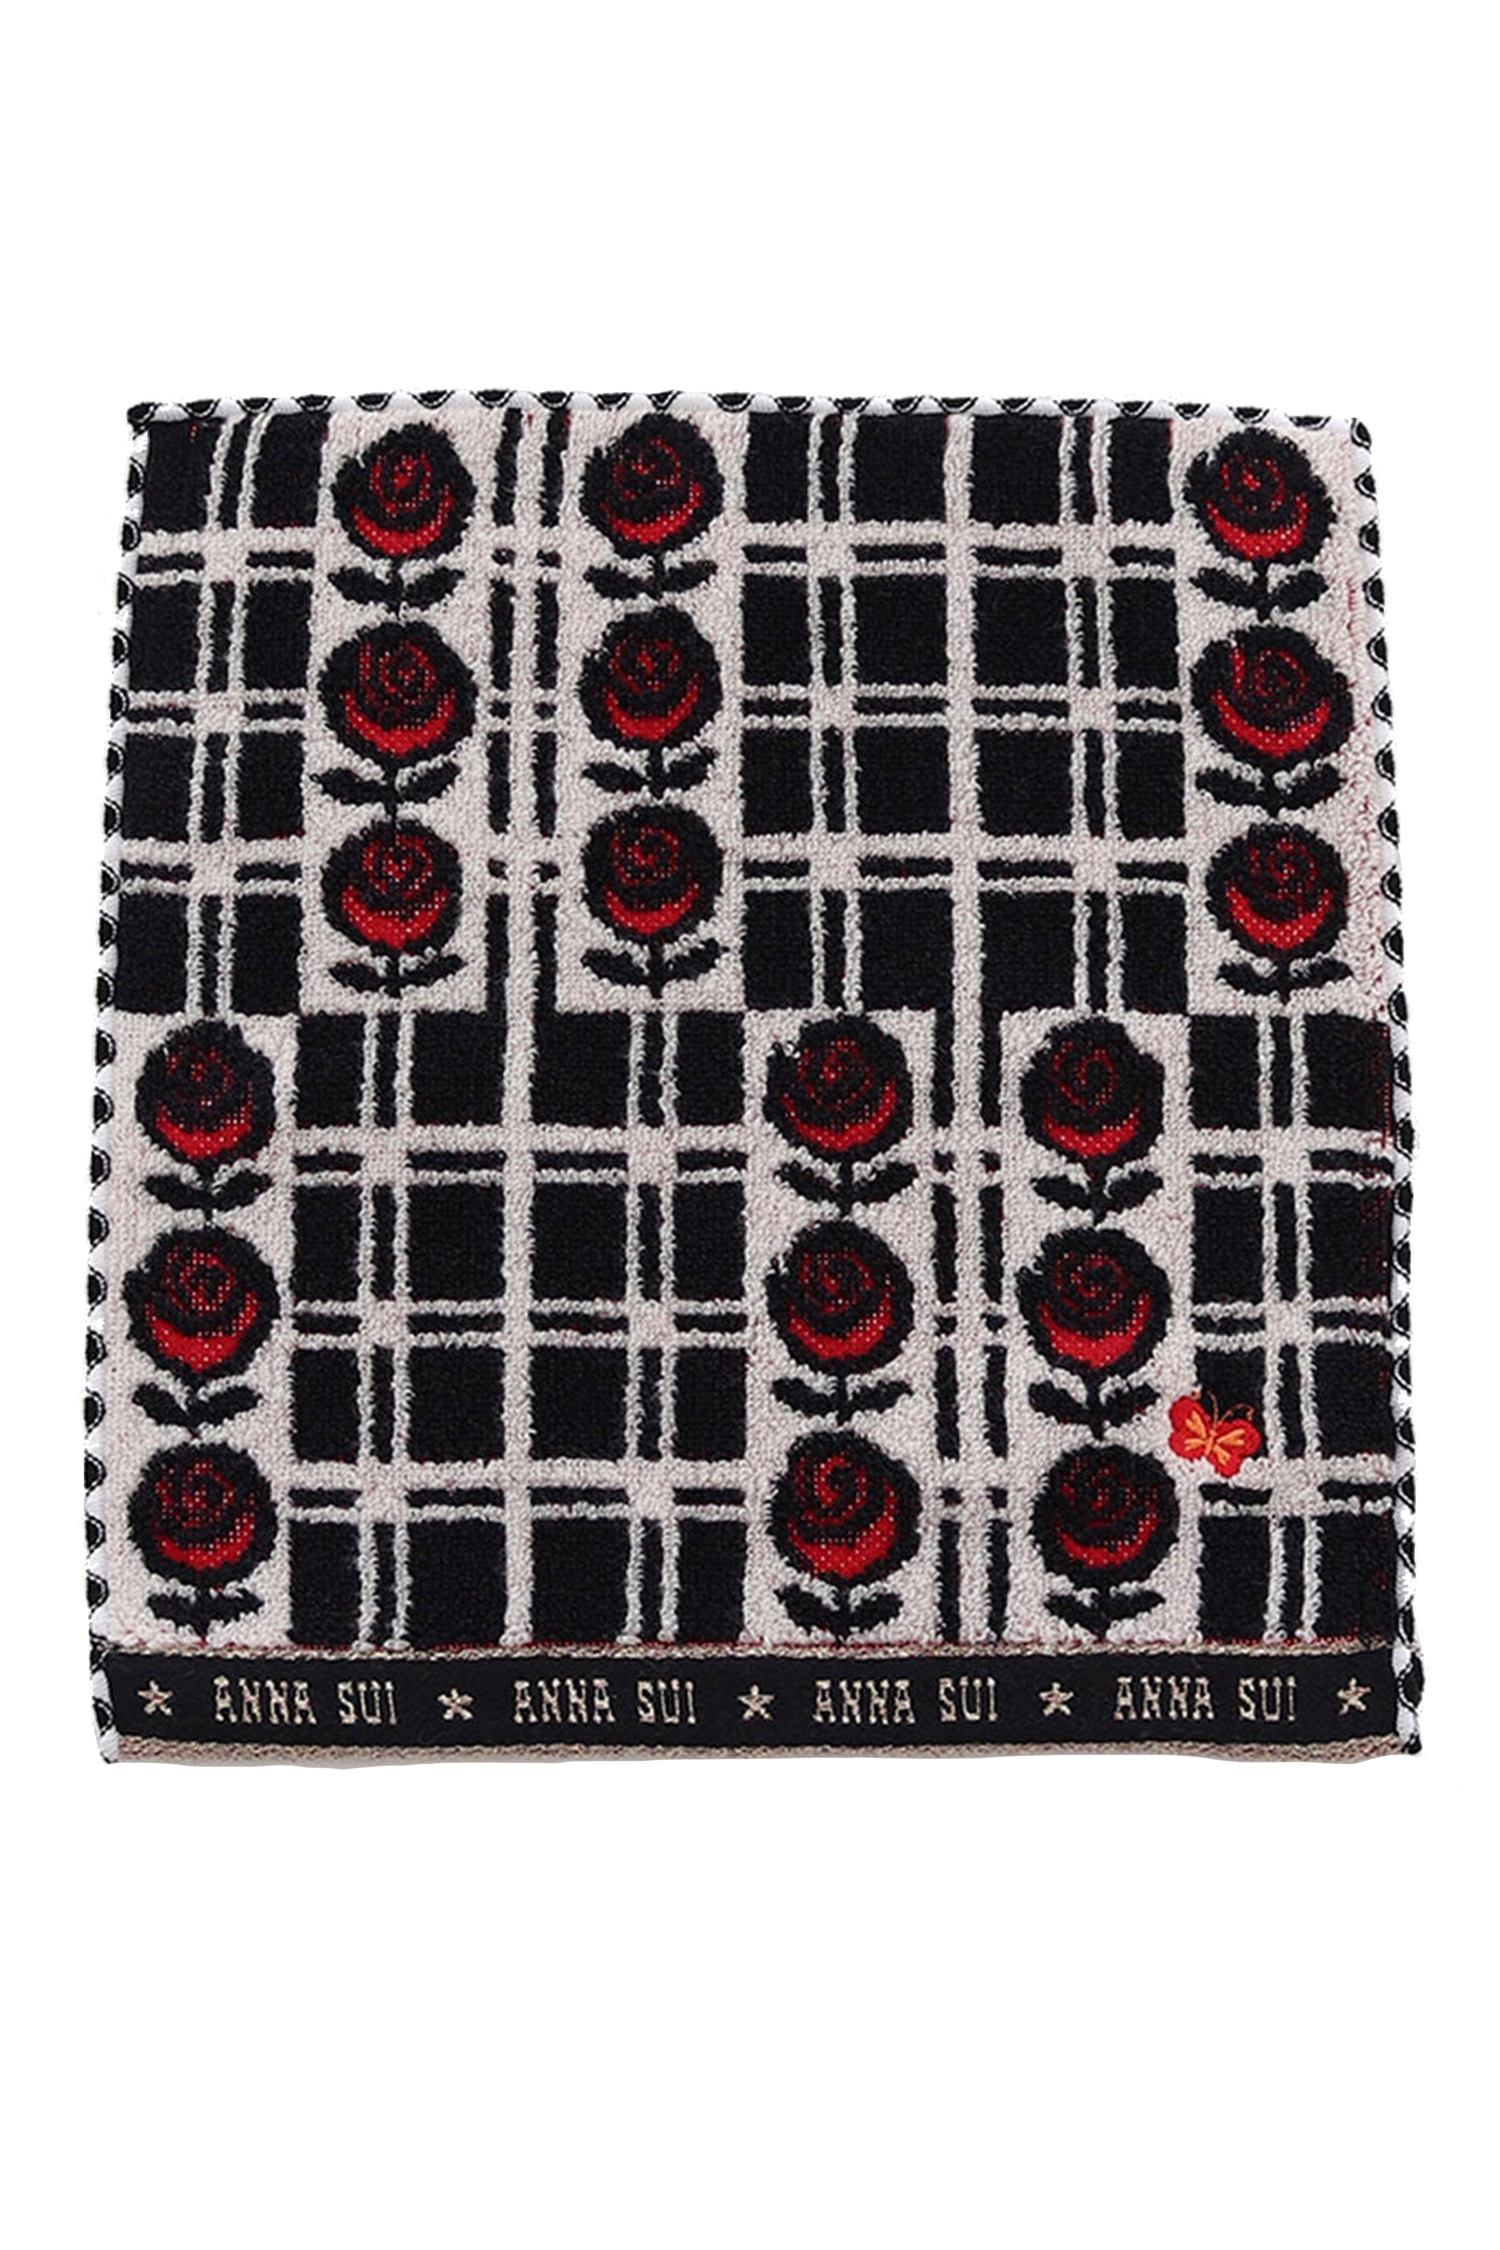 Washcloth, black with red roses on white, black border at bottom with white Anna Sui's signature